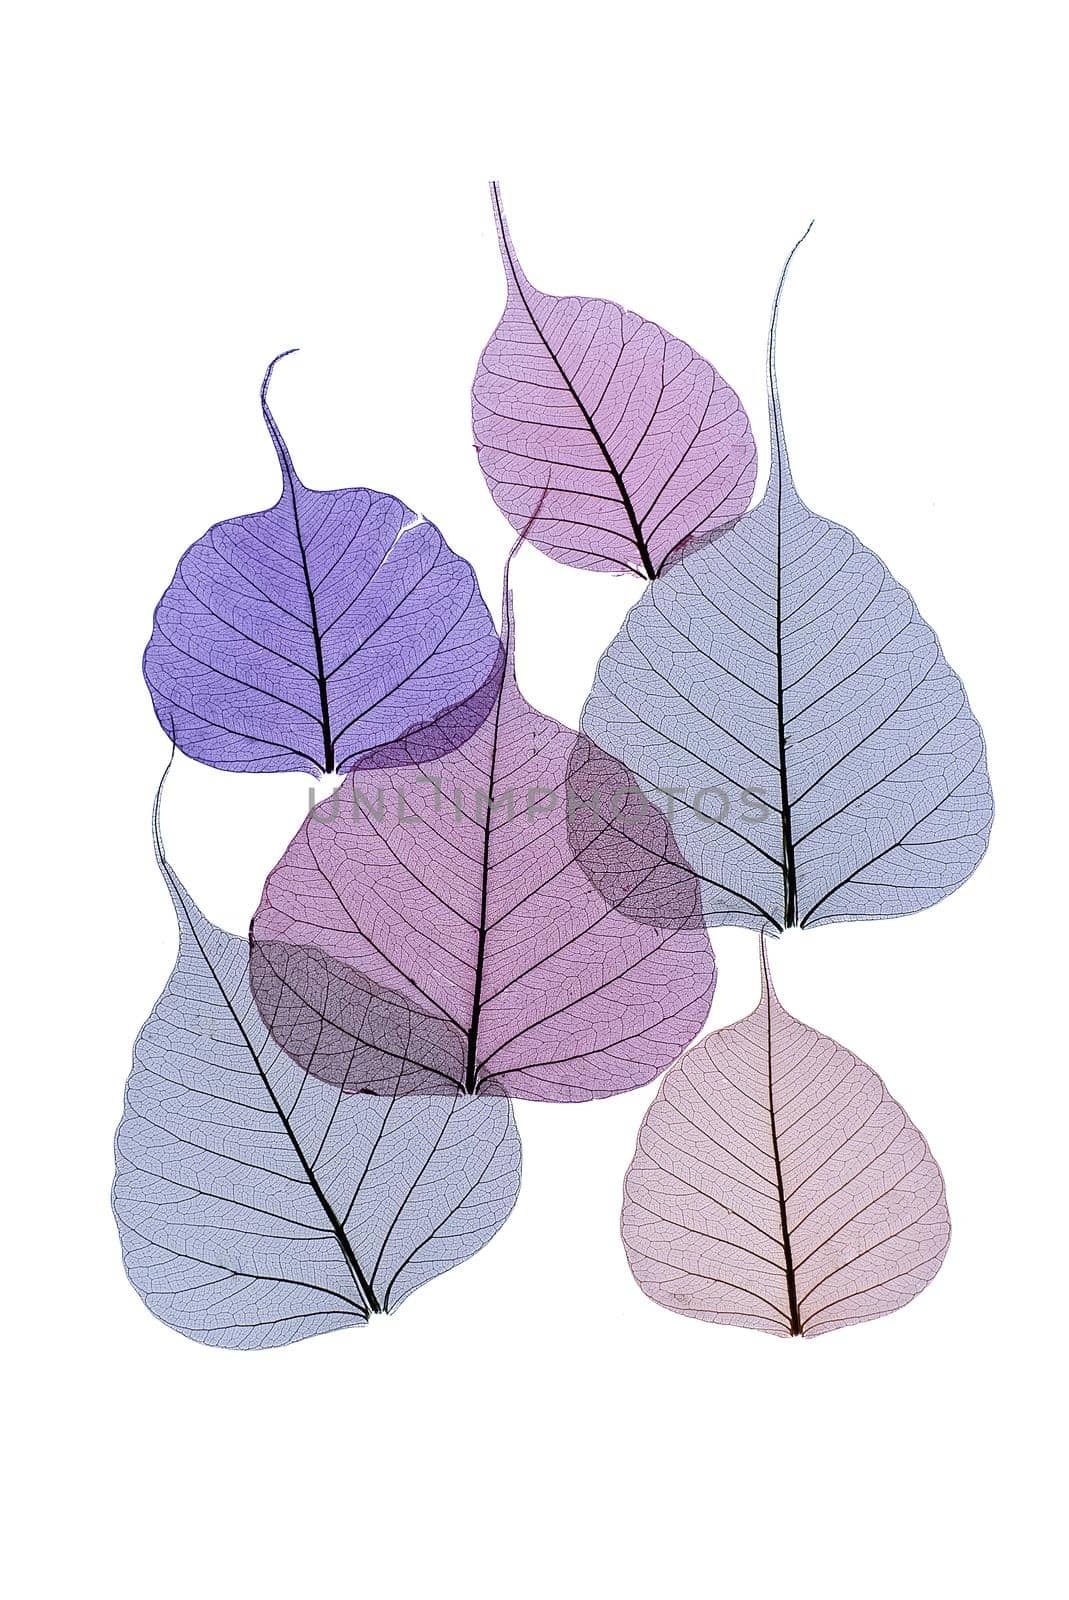 Delicate tracery of colored skeleton leaves by NetPix